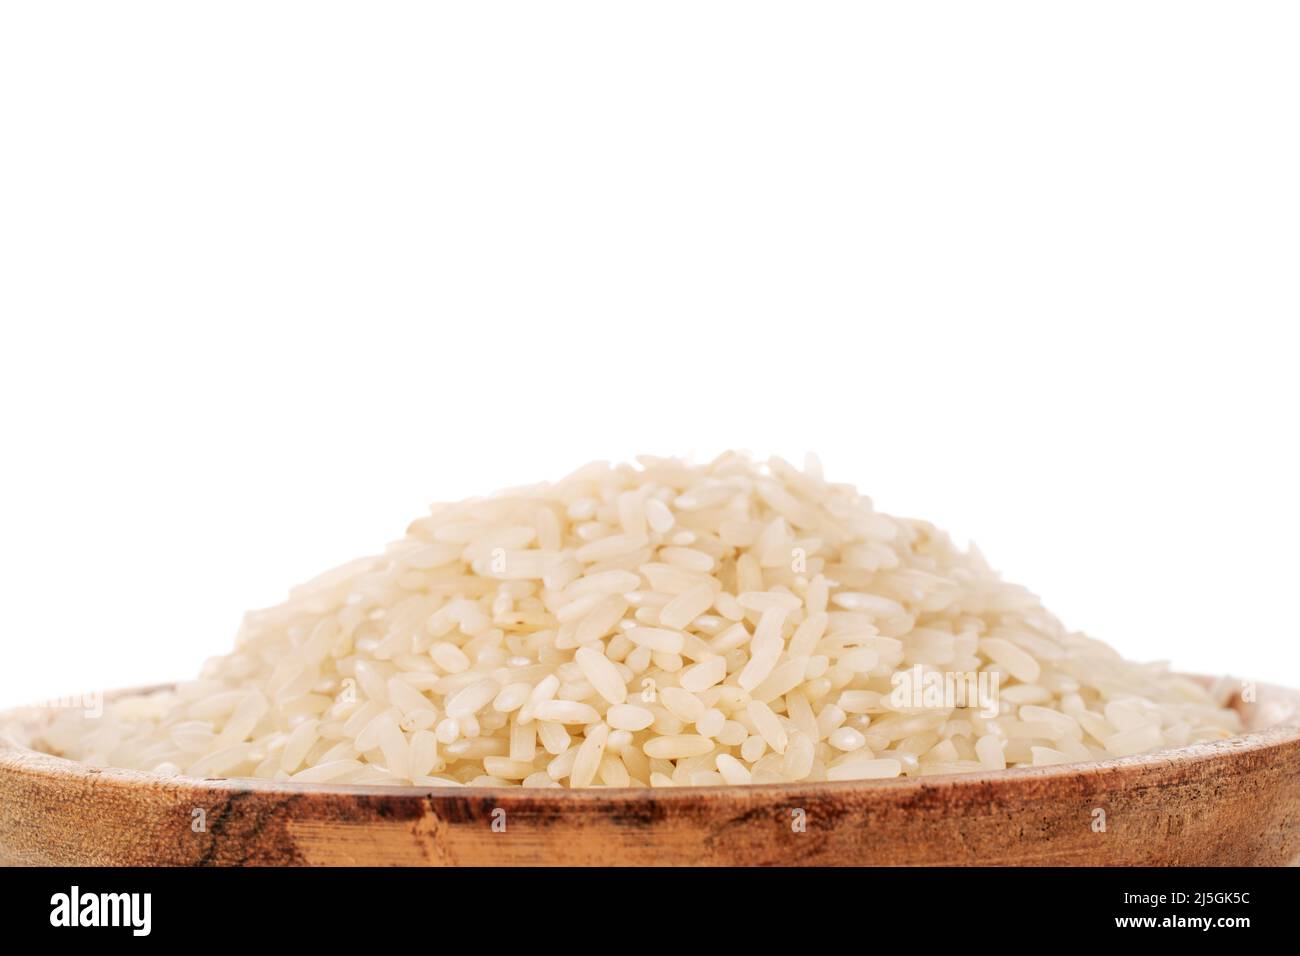 Uncooked organic rice on a wooden plate, macro, isolated on a white background. Stock Photo